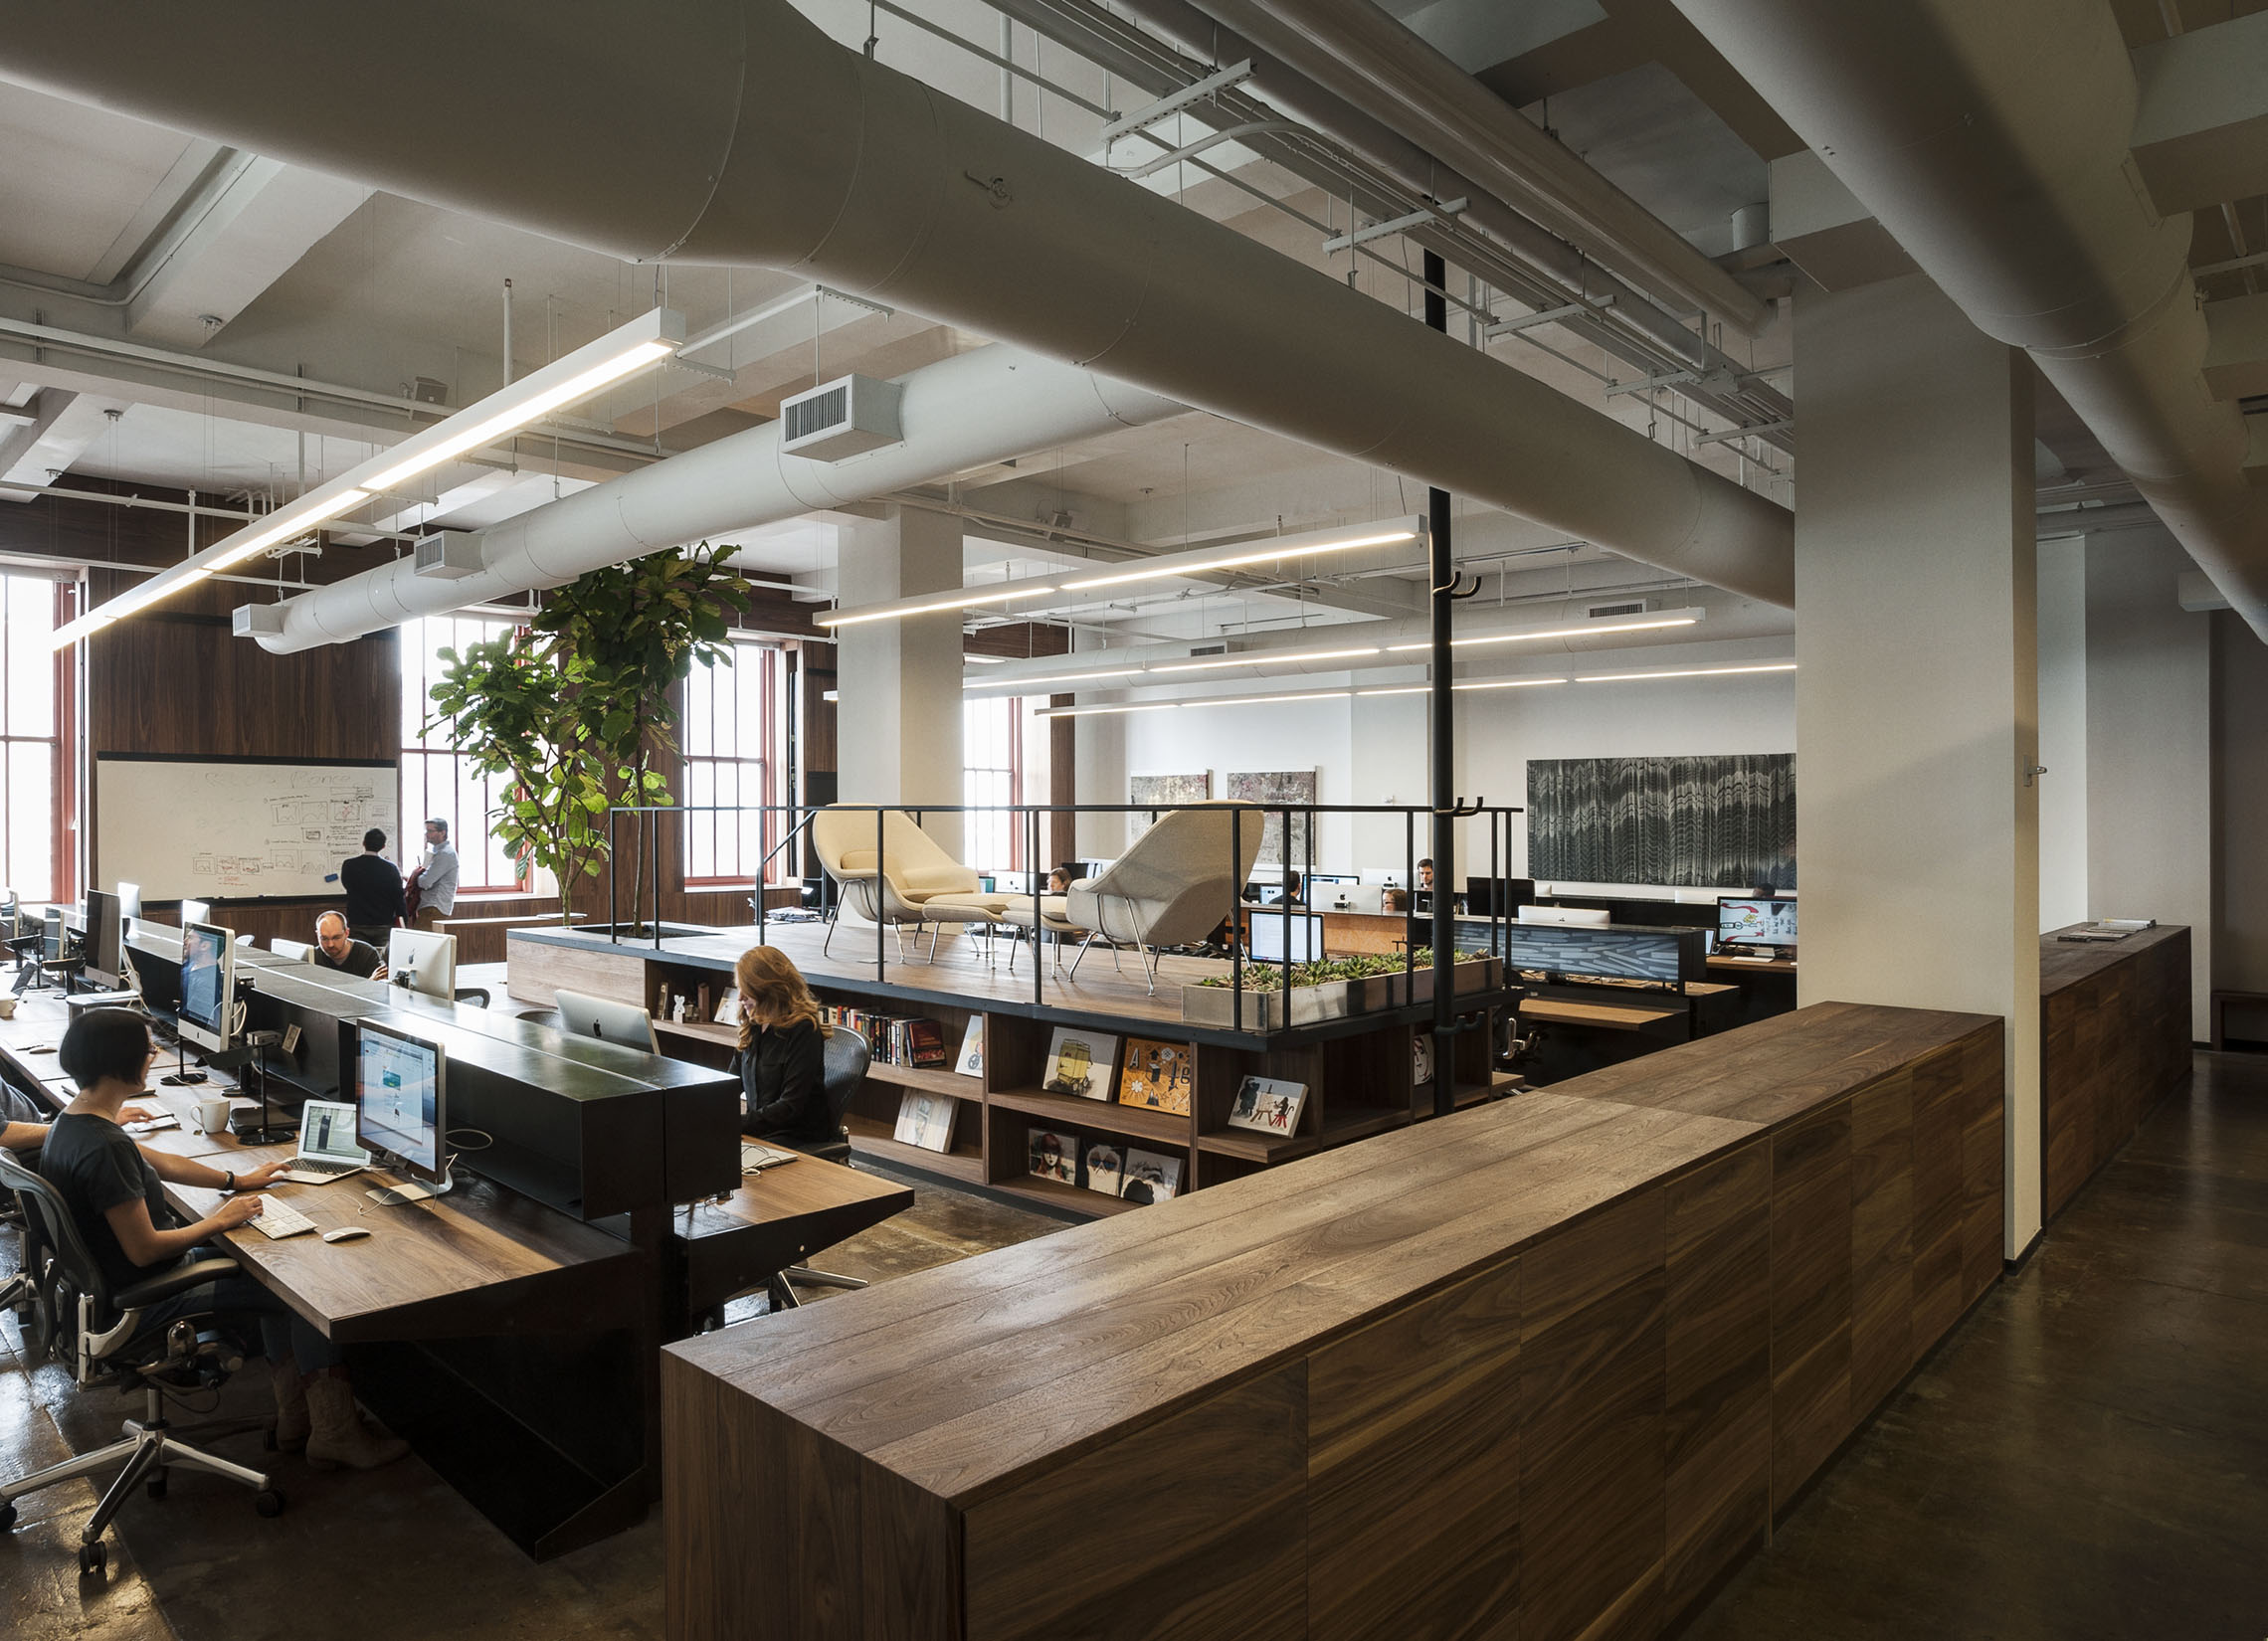 Image from FiftyThree Headquarters by +ADD in New York, United States. 